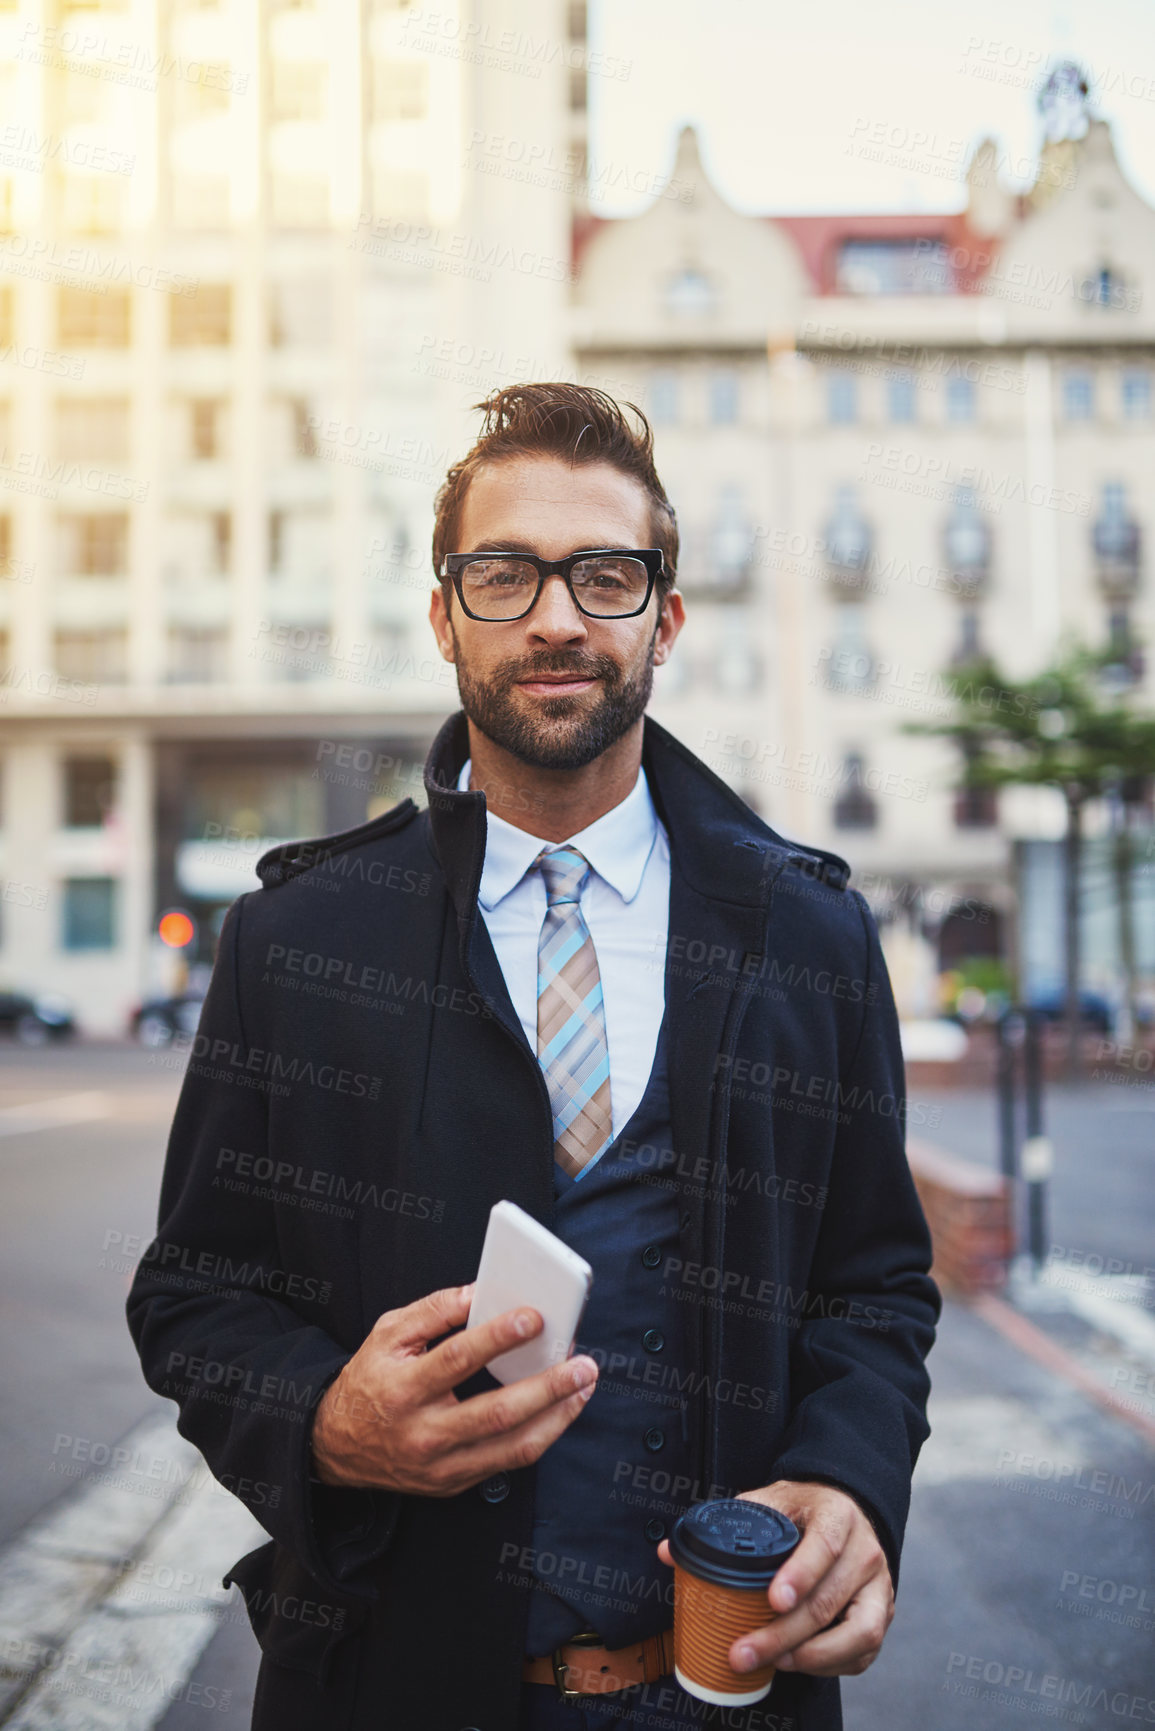 Buy stock photo Portrait of a stylish man with coffee and phone in hand while out in the city